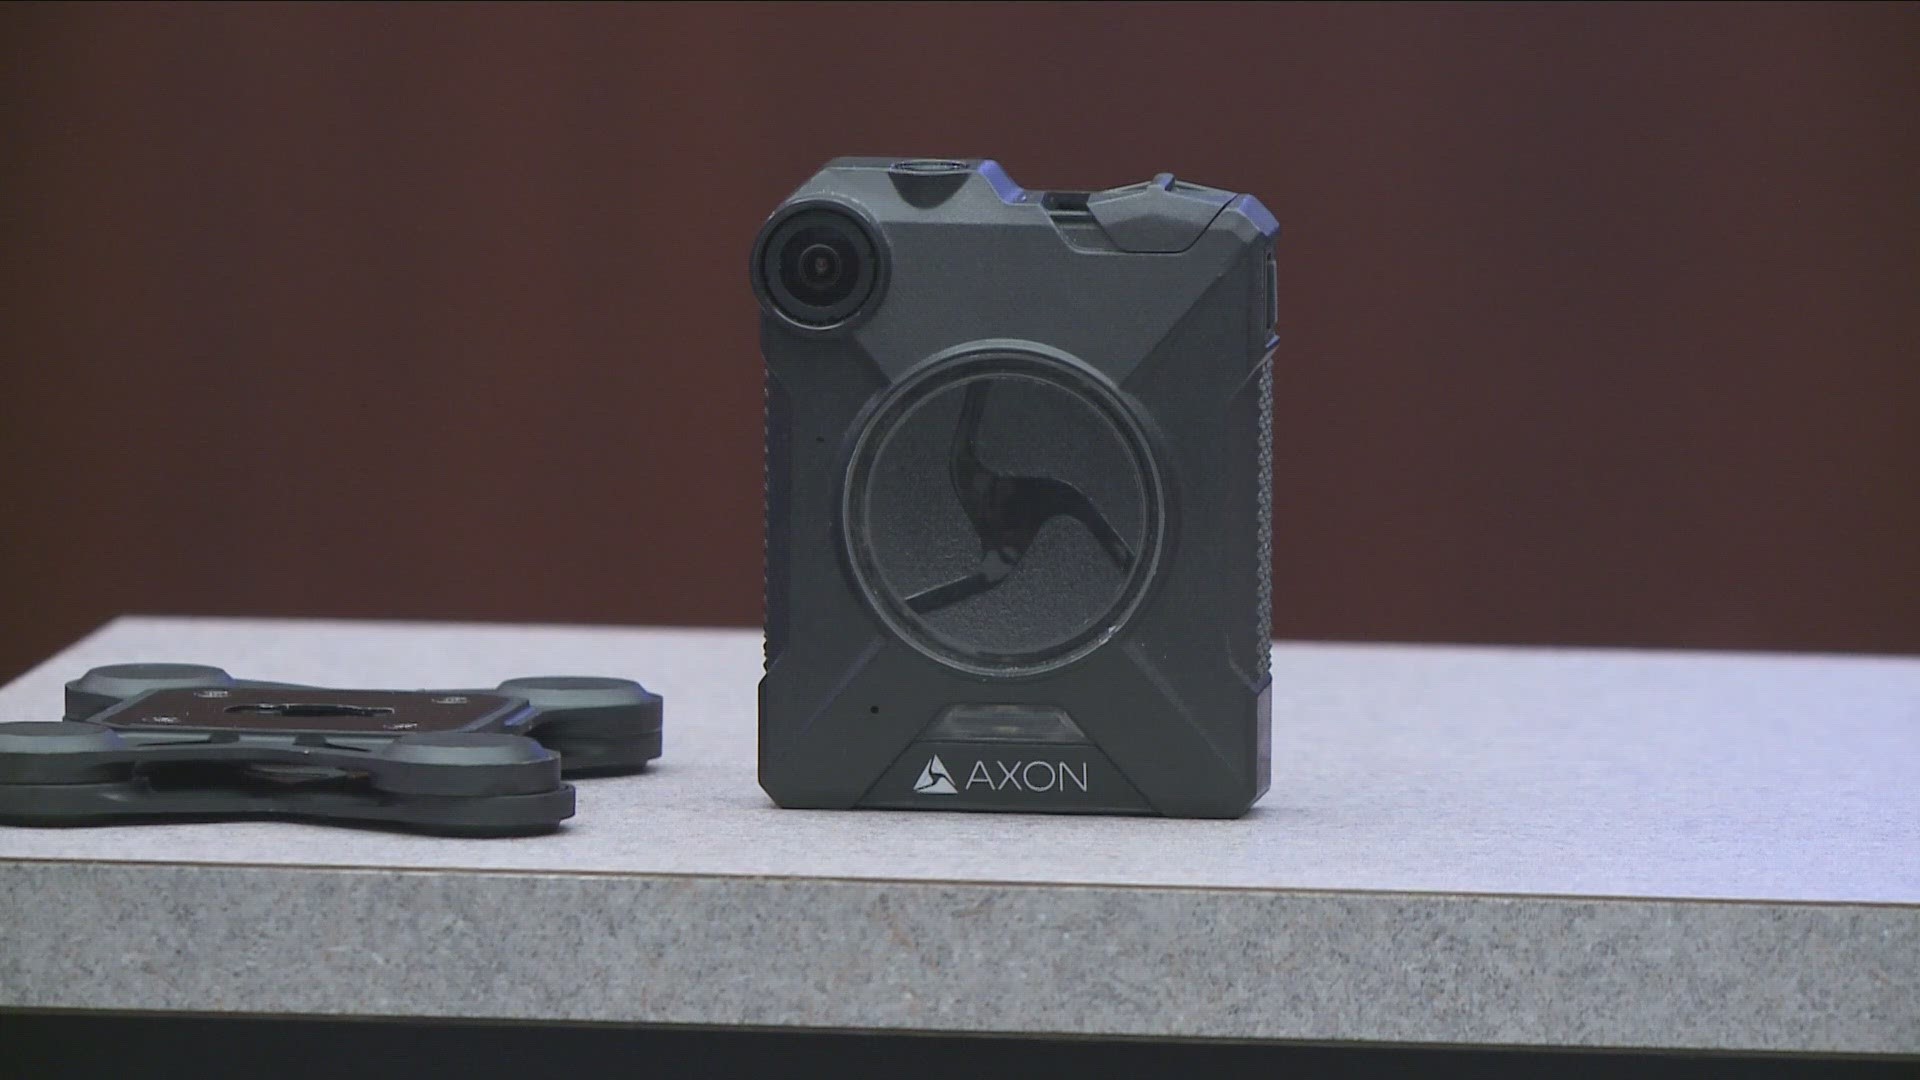 In Thursday's public safety meeting, the request to have probation officers wear body cameras was tabled. Conversations about the camera is expected this year.